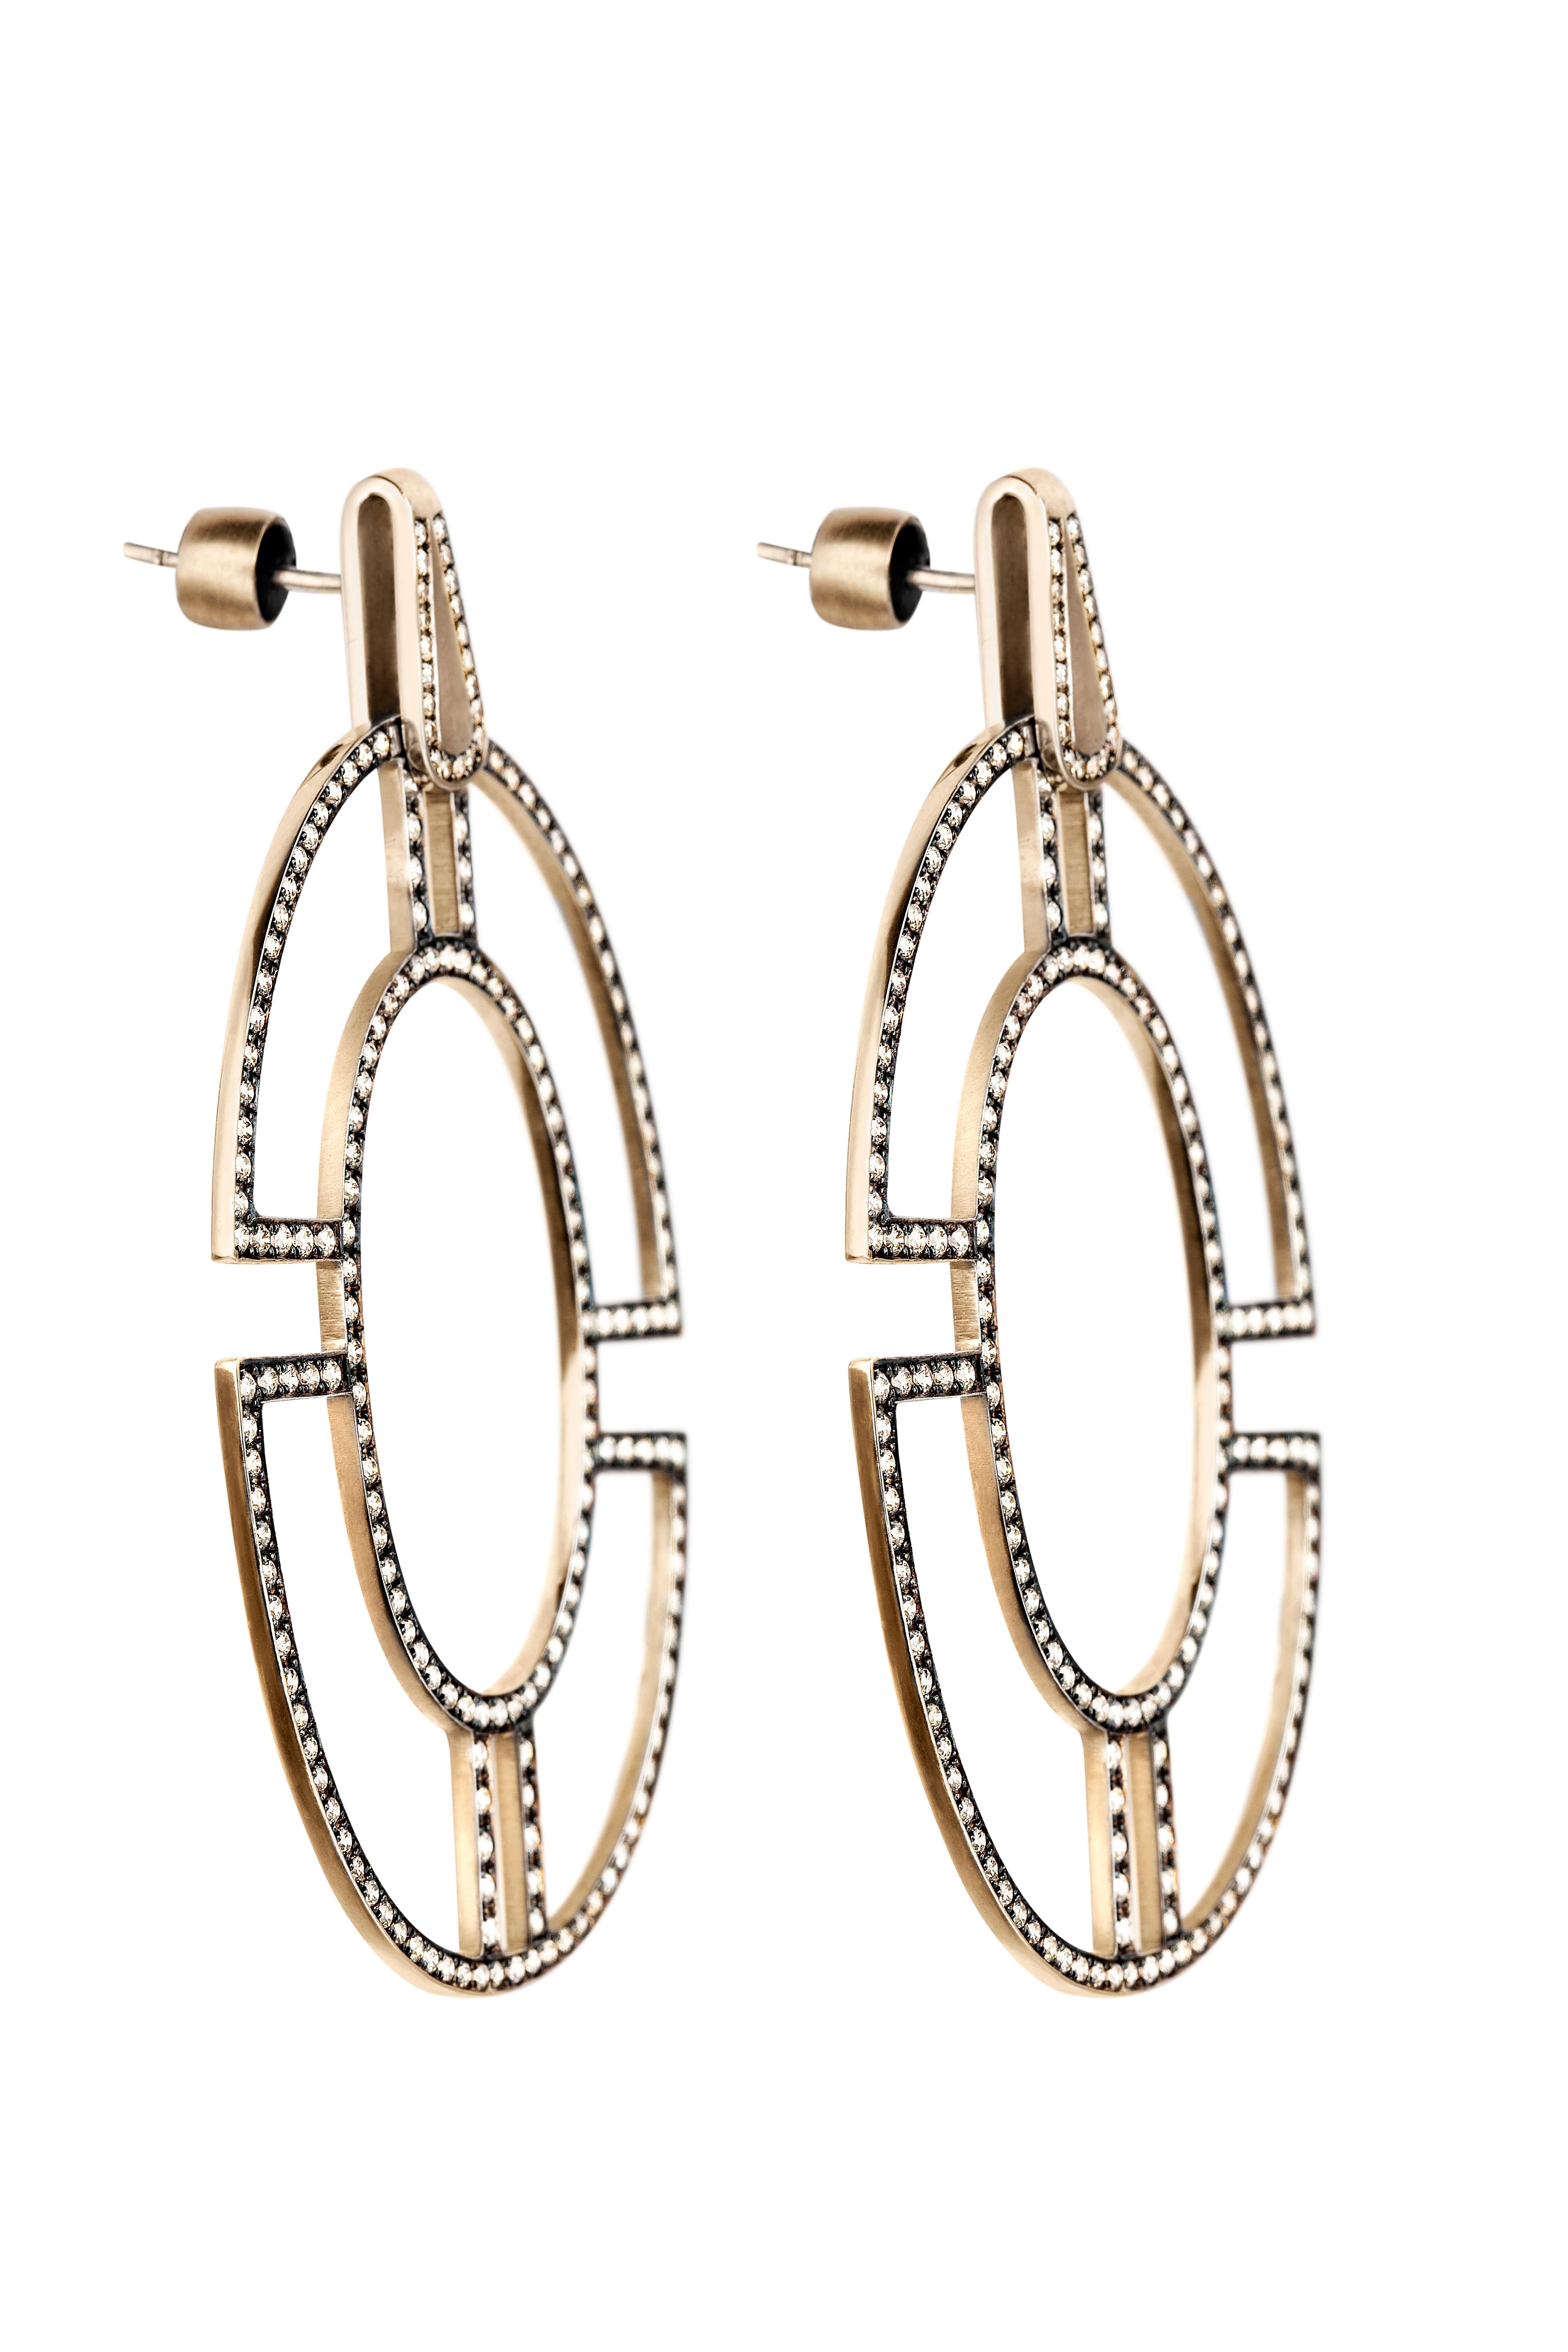 These earrings from POLINA ELLIS' BYZANTIUM collection are handcrafted in 18K raw white gold with 3,16ct champagne brilliant cut diamonds.
Length: 6,20cm
Width: 3,90cm